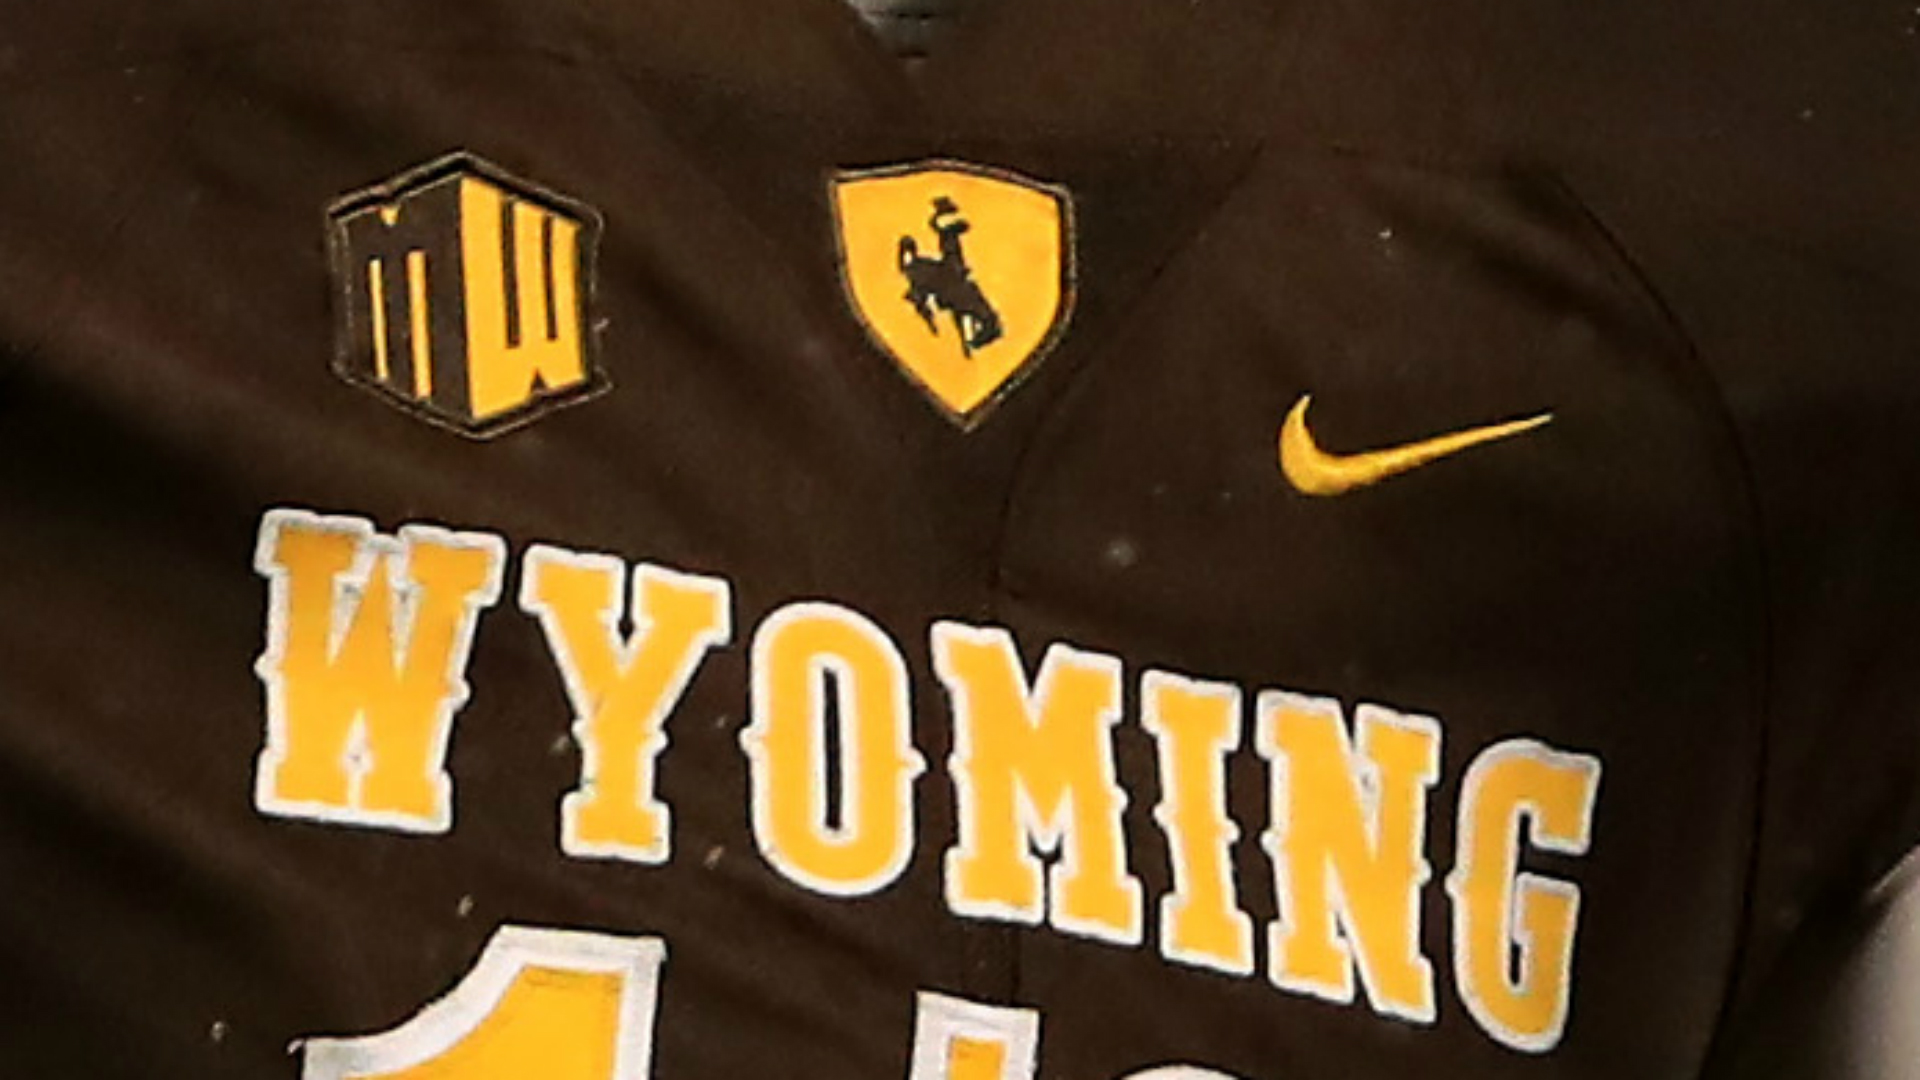 Wyoming punter Tim Zaleski completely missed the football on punt attempt